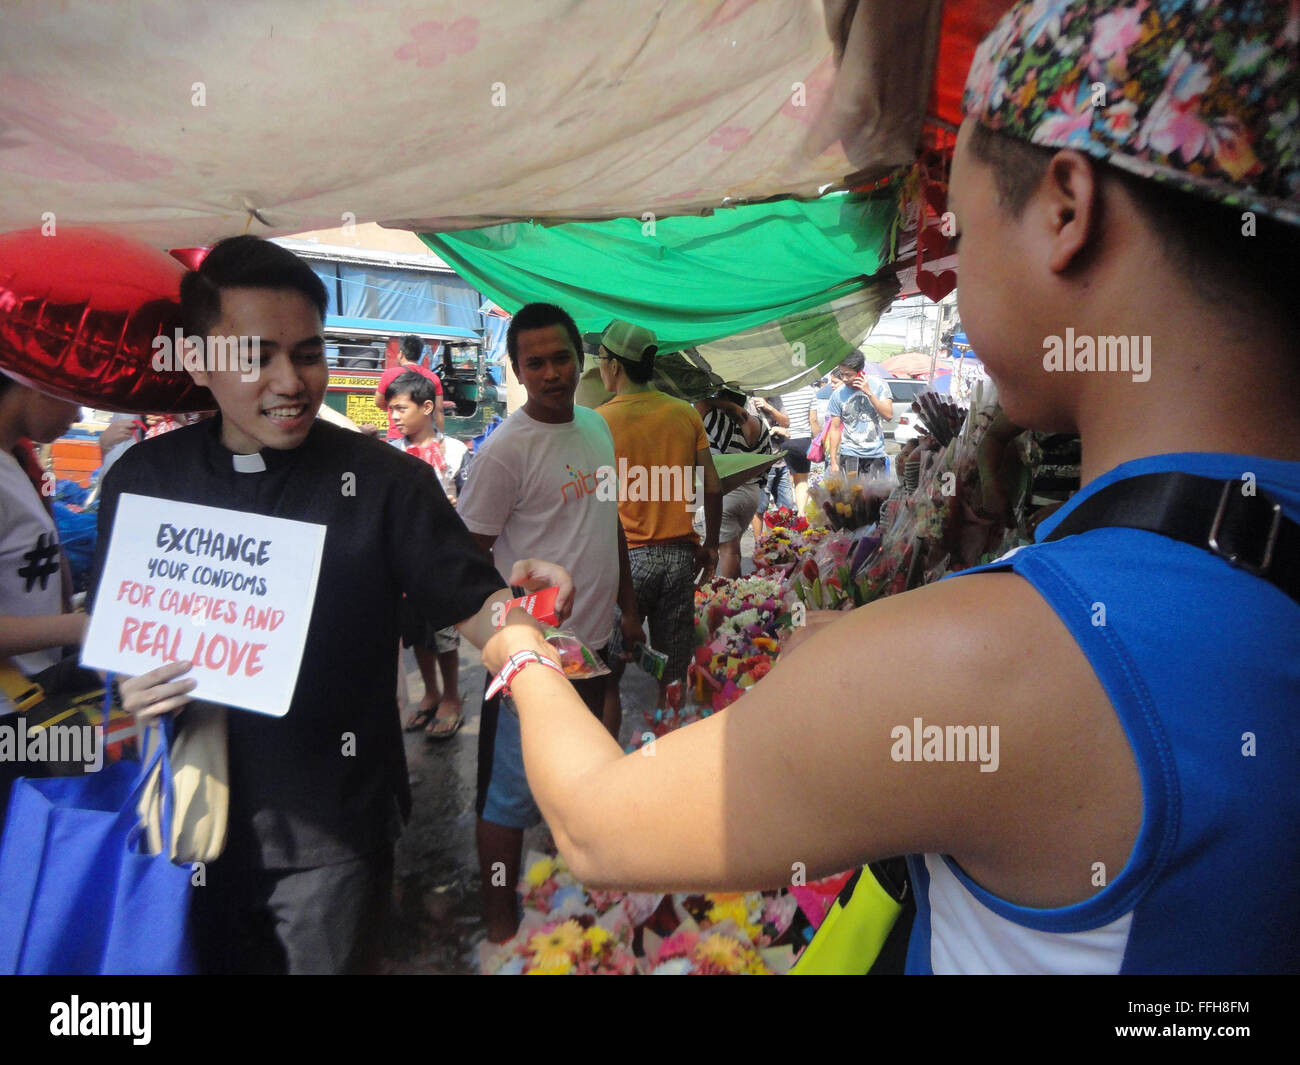 Manila, Philippines. 14th Feb, 2016. Members of a pro-life group give away candies in exchange for condoms at the Dangwa flower market in Manila, Philippines on Valentine's Day. Valentines Day is celebrated on February 14 every year. Credit:  Richard James M. Mendoza/Pacific Press/Alamy Live News Stock Photo